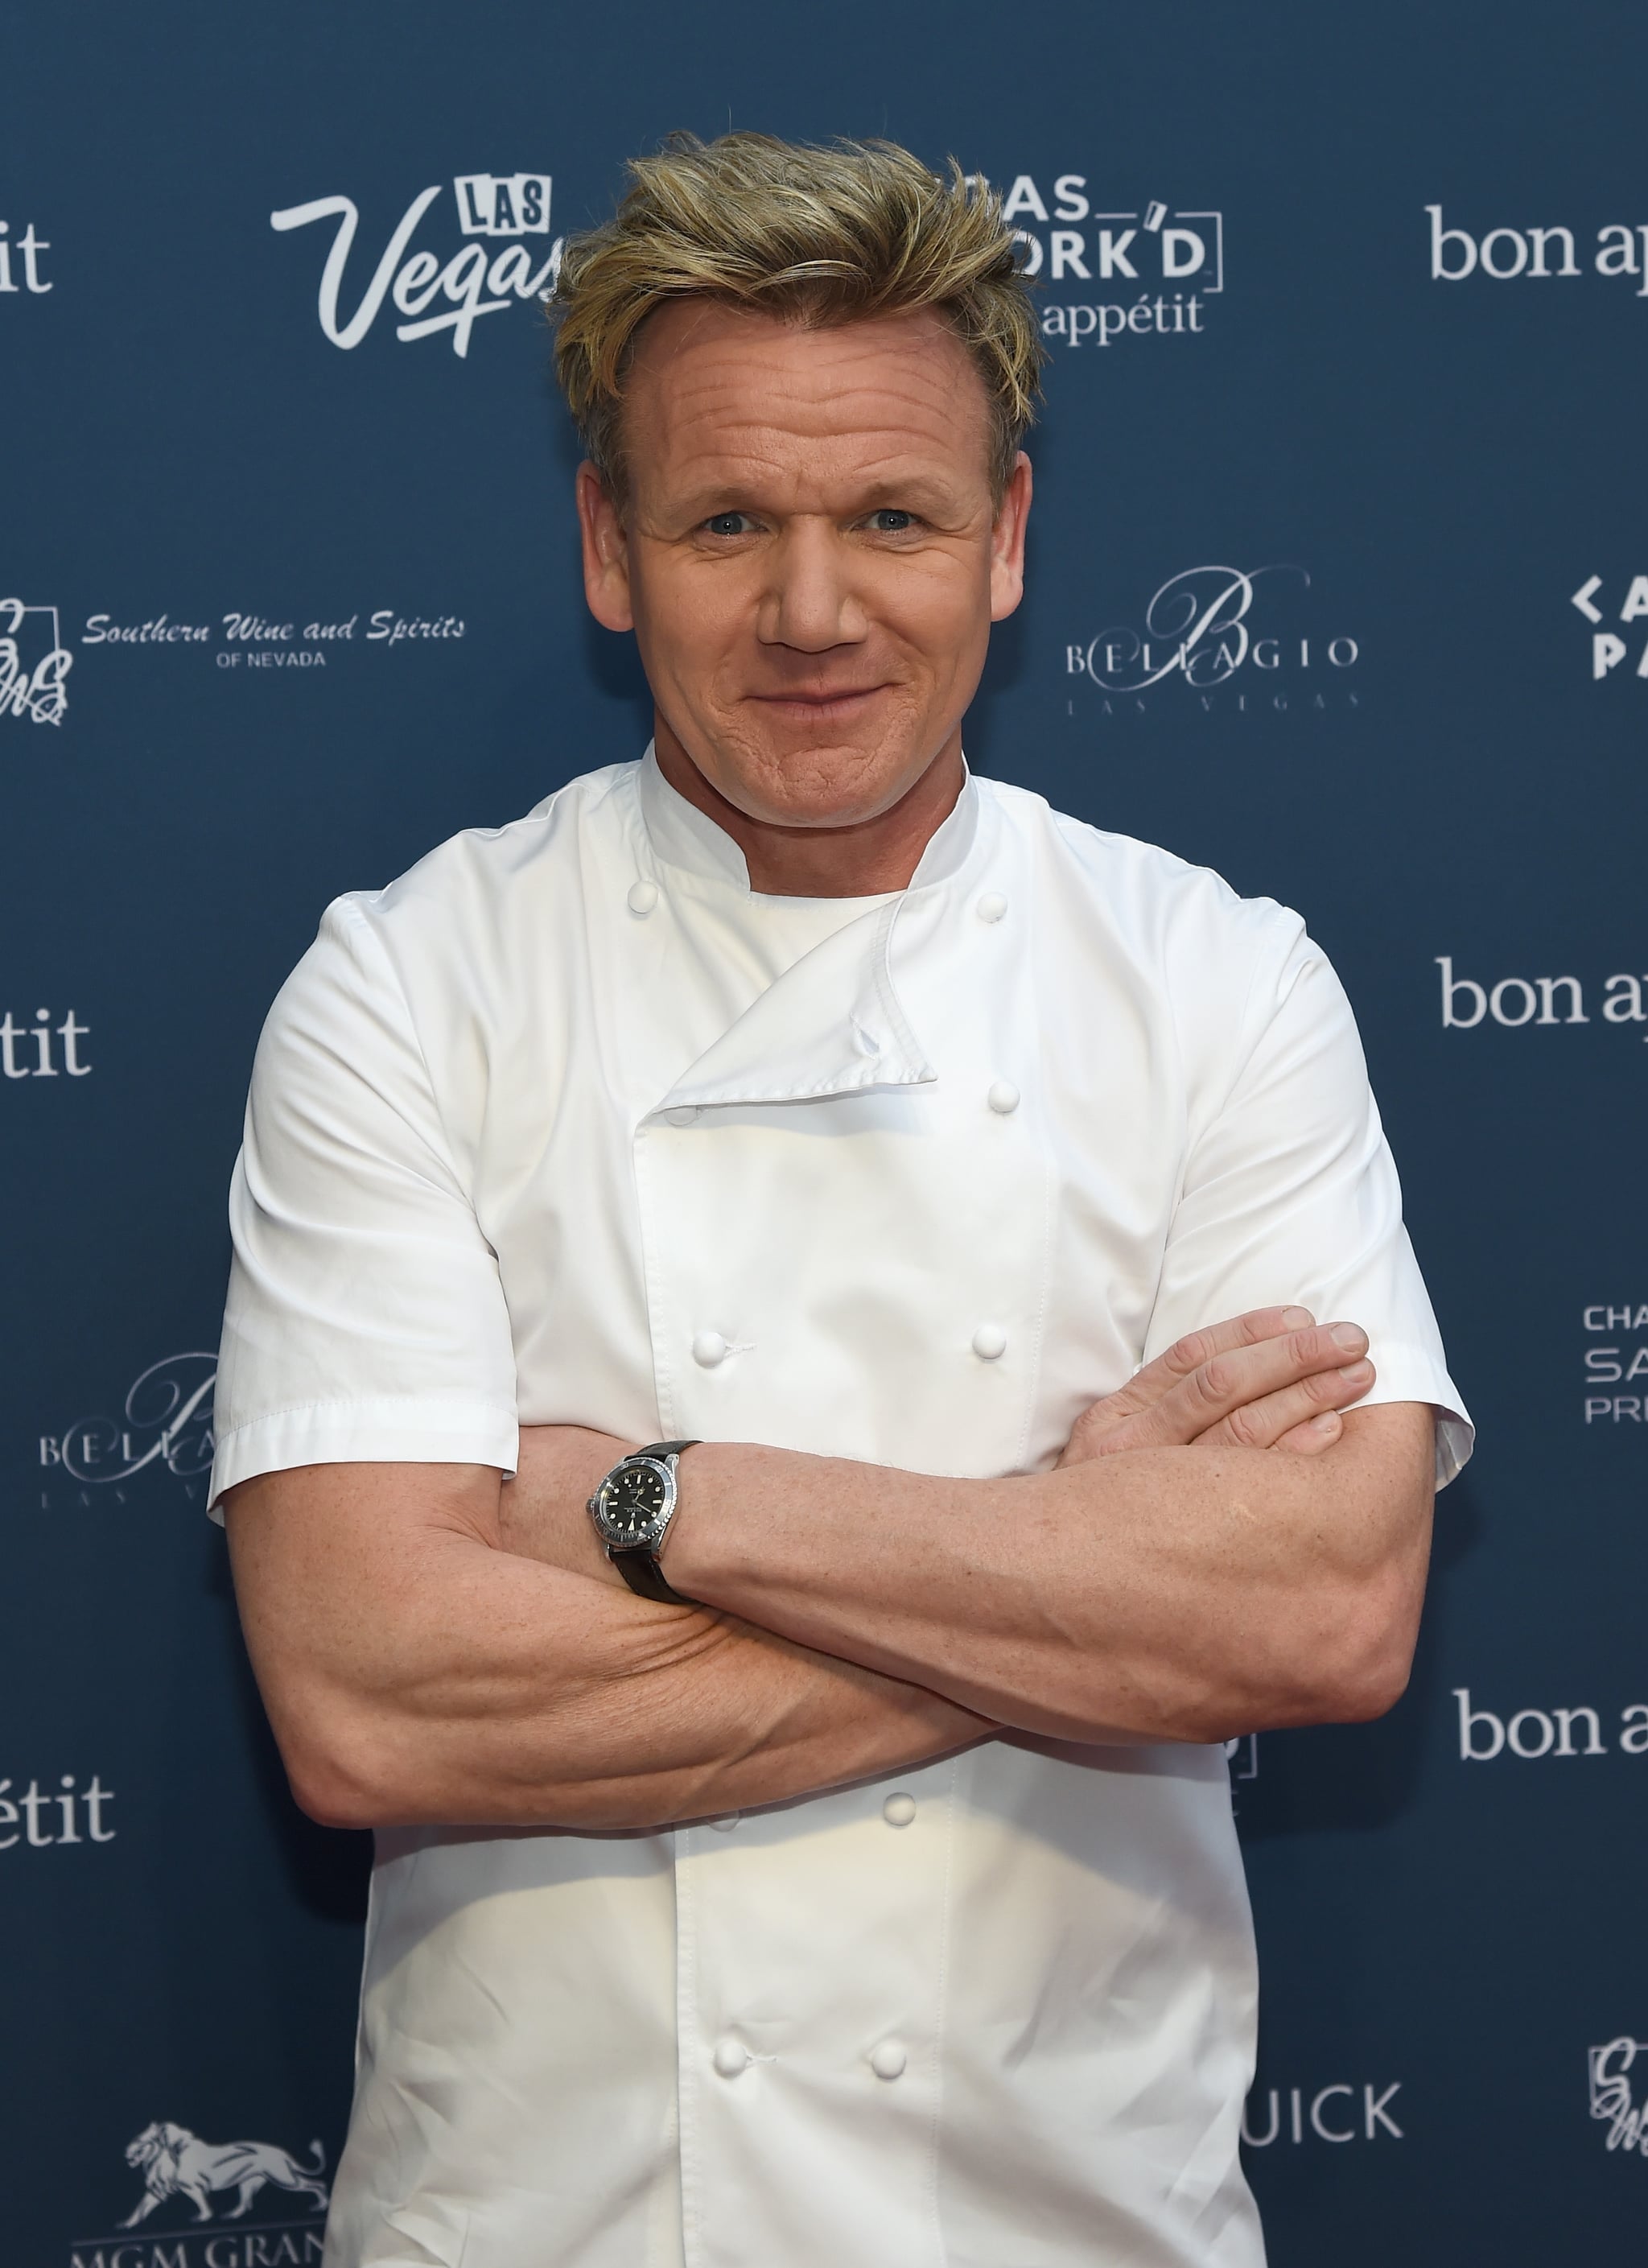 LAS VEGAS, NV - APRIL 24:  Chef Gordon Ramsay attends Vegas Uncork'd by Bon Appetit's Grand Tasting event at Caesars Palace on April 24, 2015 in Las Vegas, Nevada.  (Photo by Ethan Miller/Getty Images for Vegas Uncork'd by Bon Appetit)